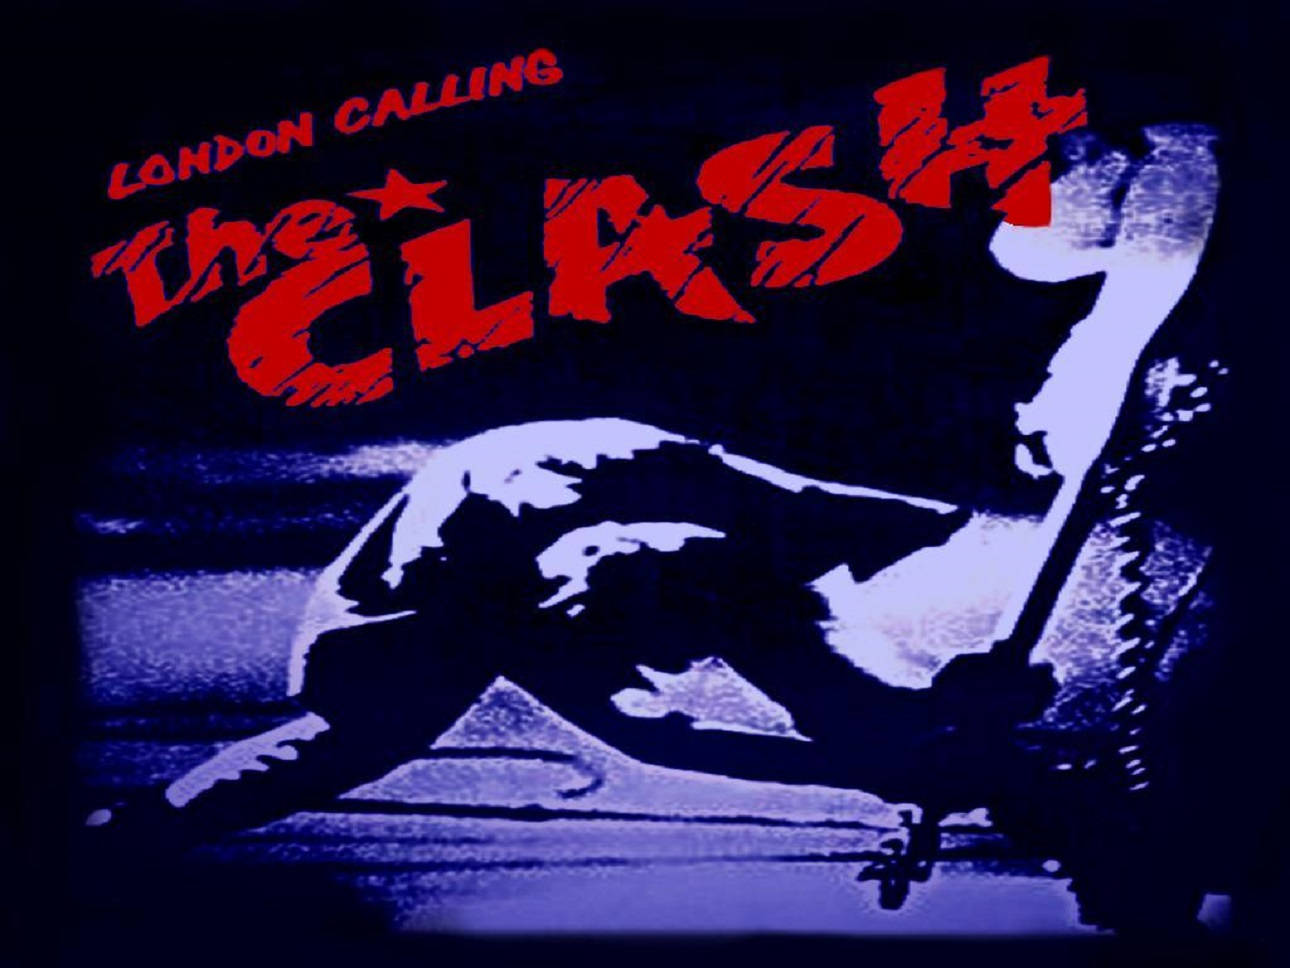 Iconic London Calling Album Cover By The Clash Wallpaper